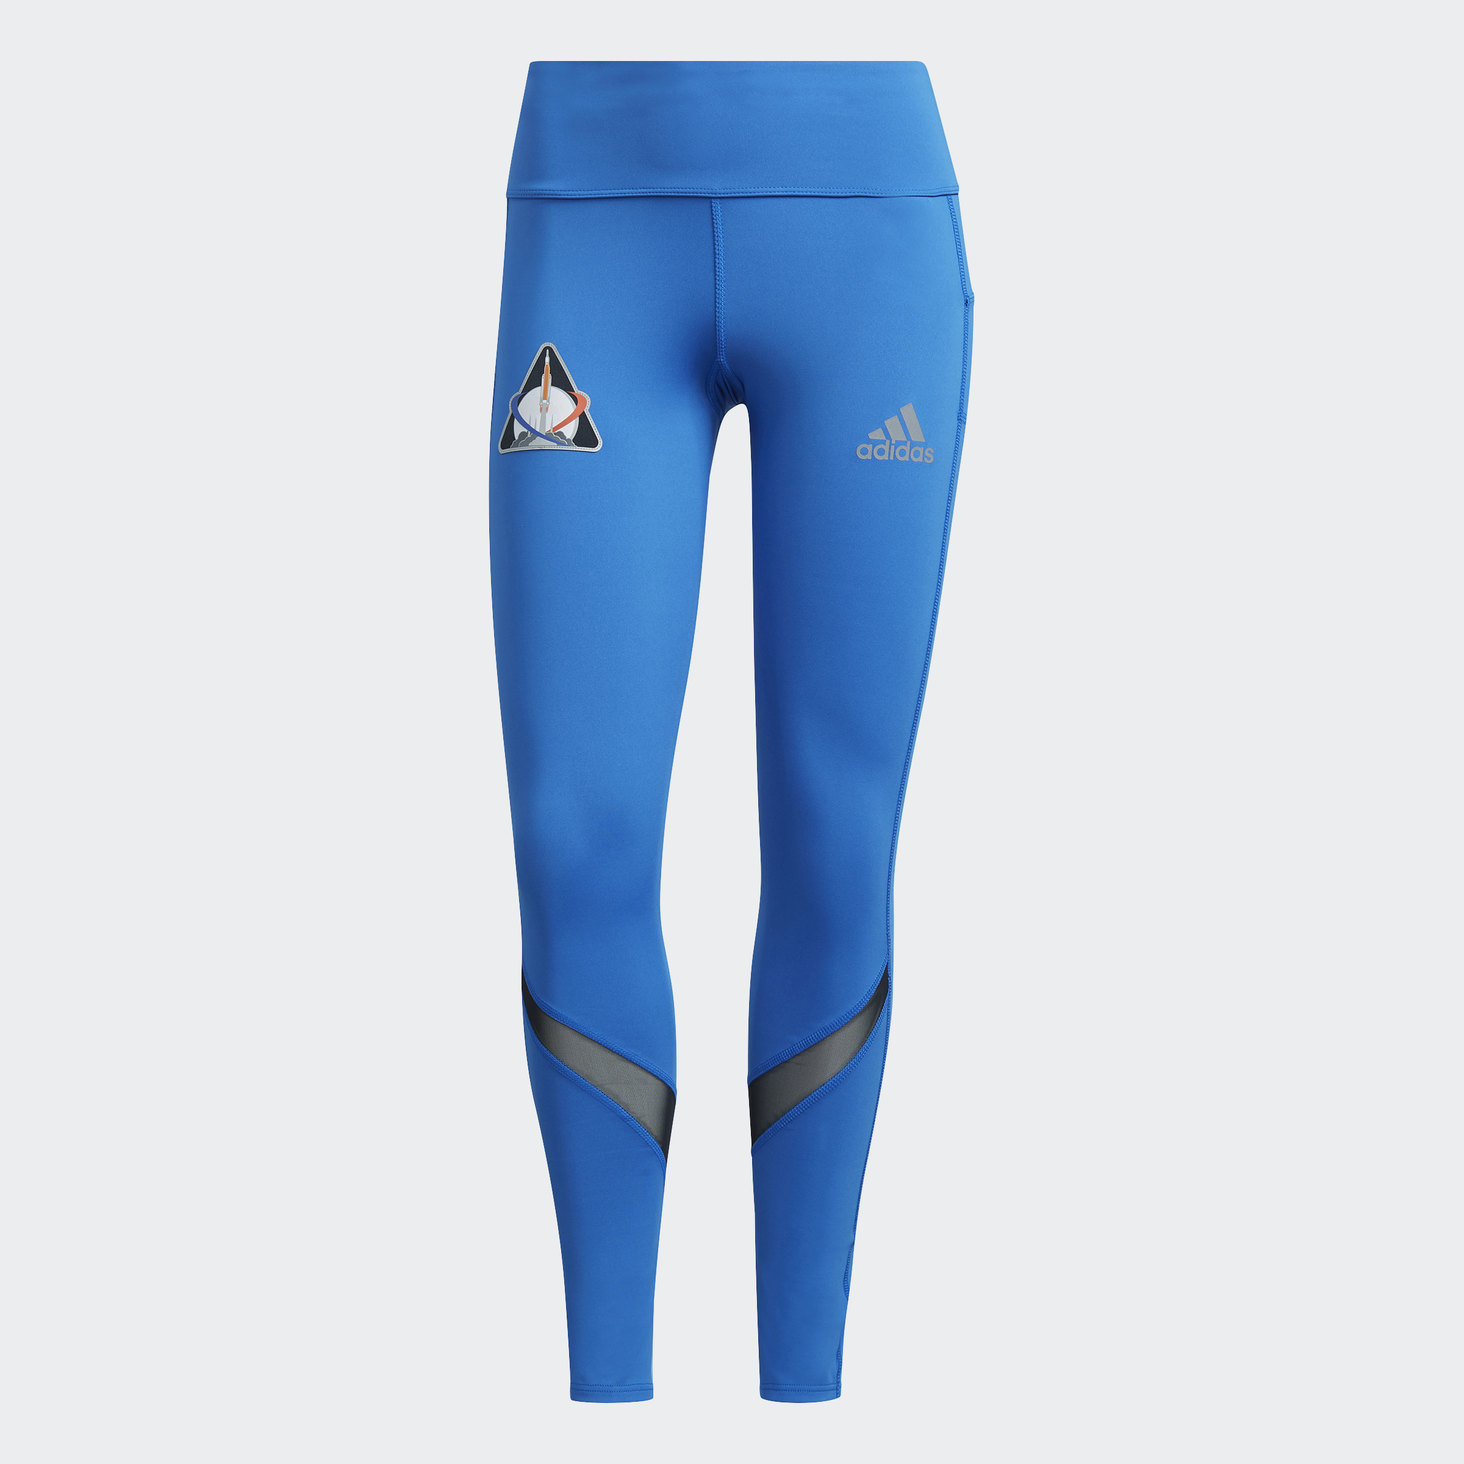 Adidas Leggings Size 1099 | International of Agriculture Precision Society